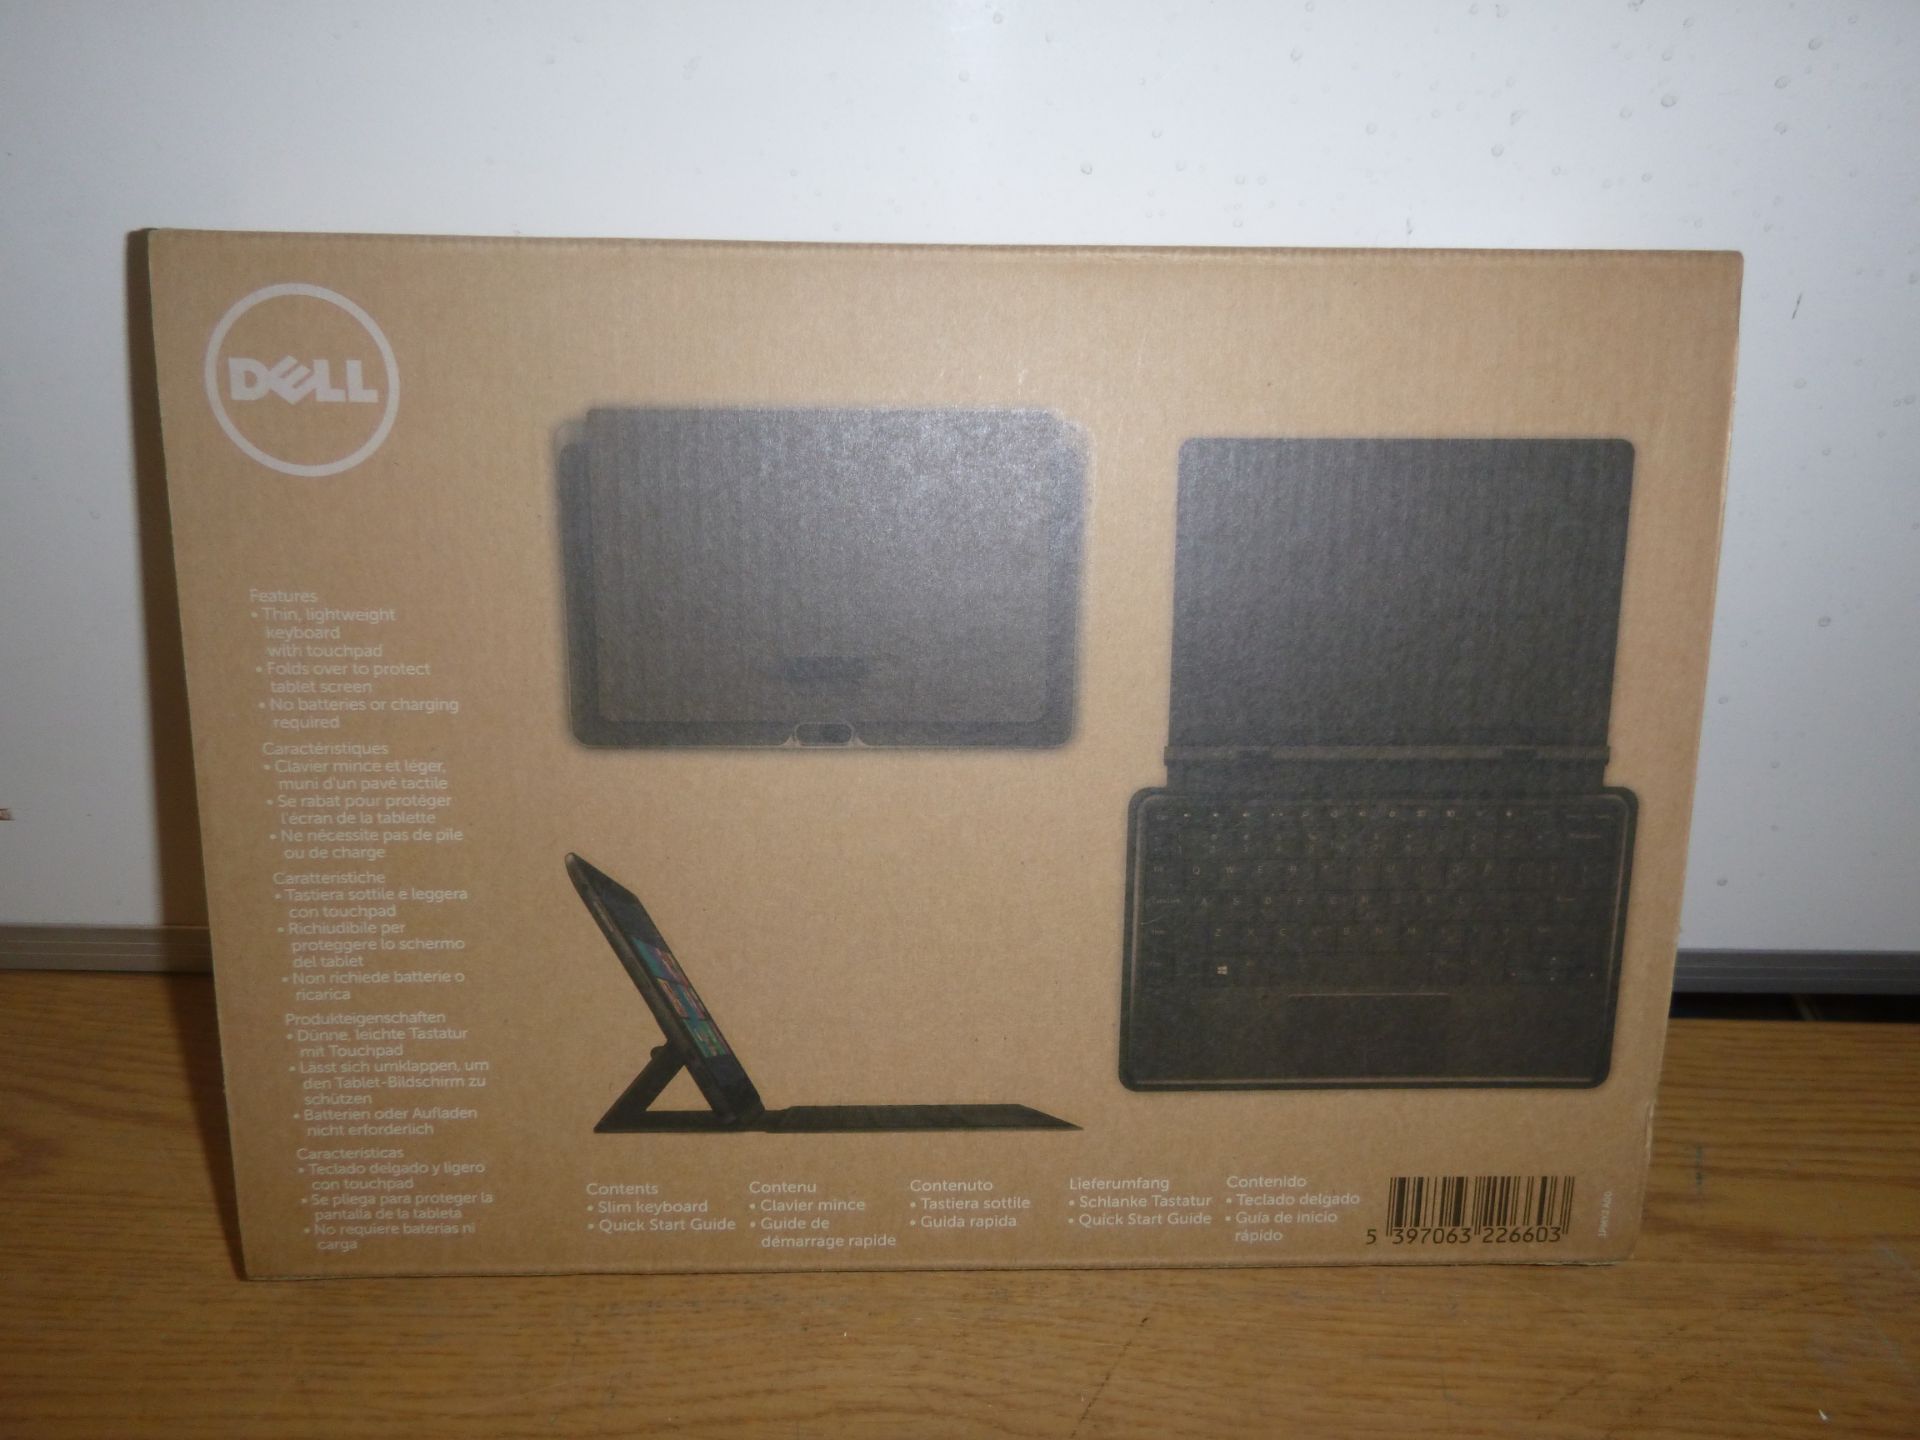 DELL SLIM TABLET KEYBOARD FOR DELL VENUE 11 PRO 5130/7130/7139 TABLET. BOXED